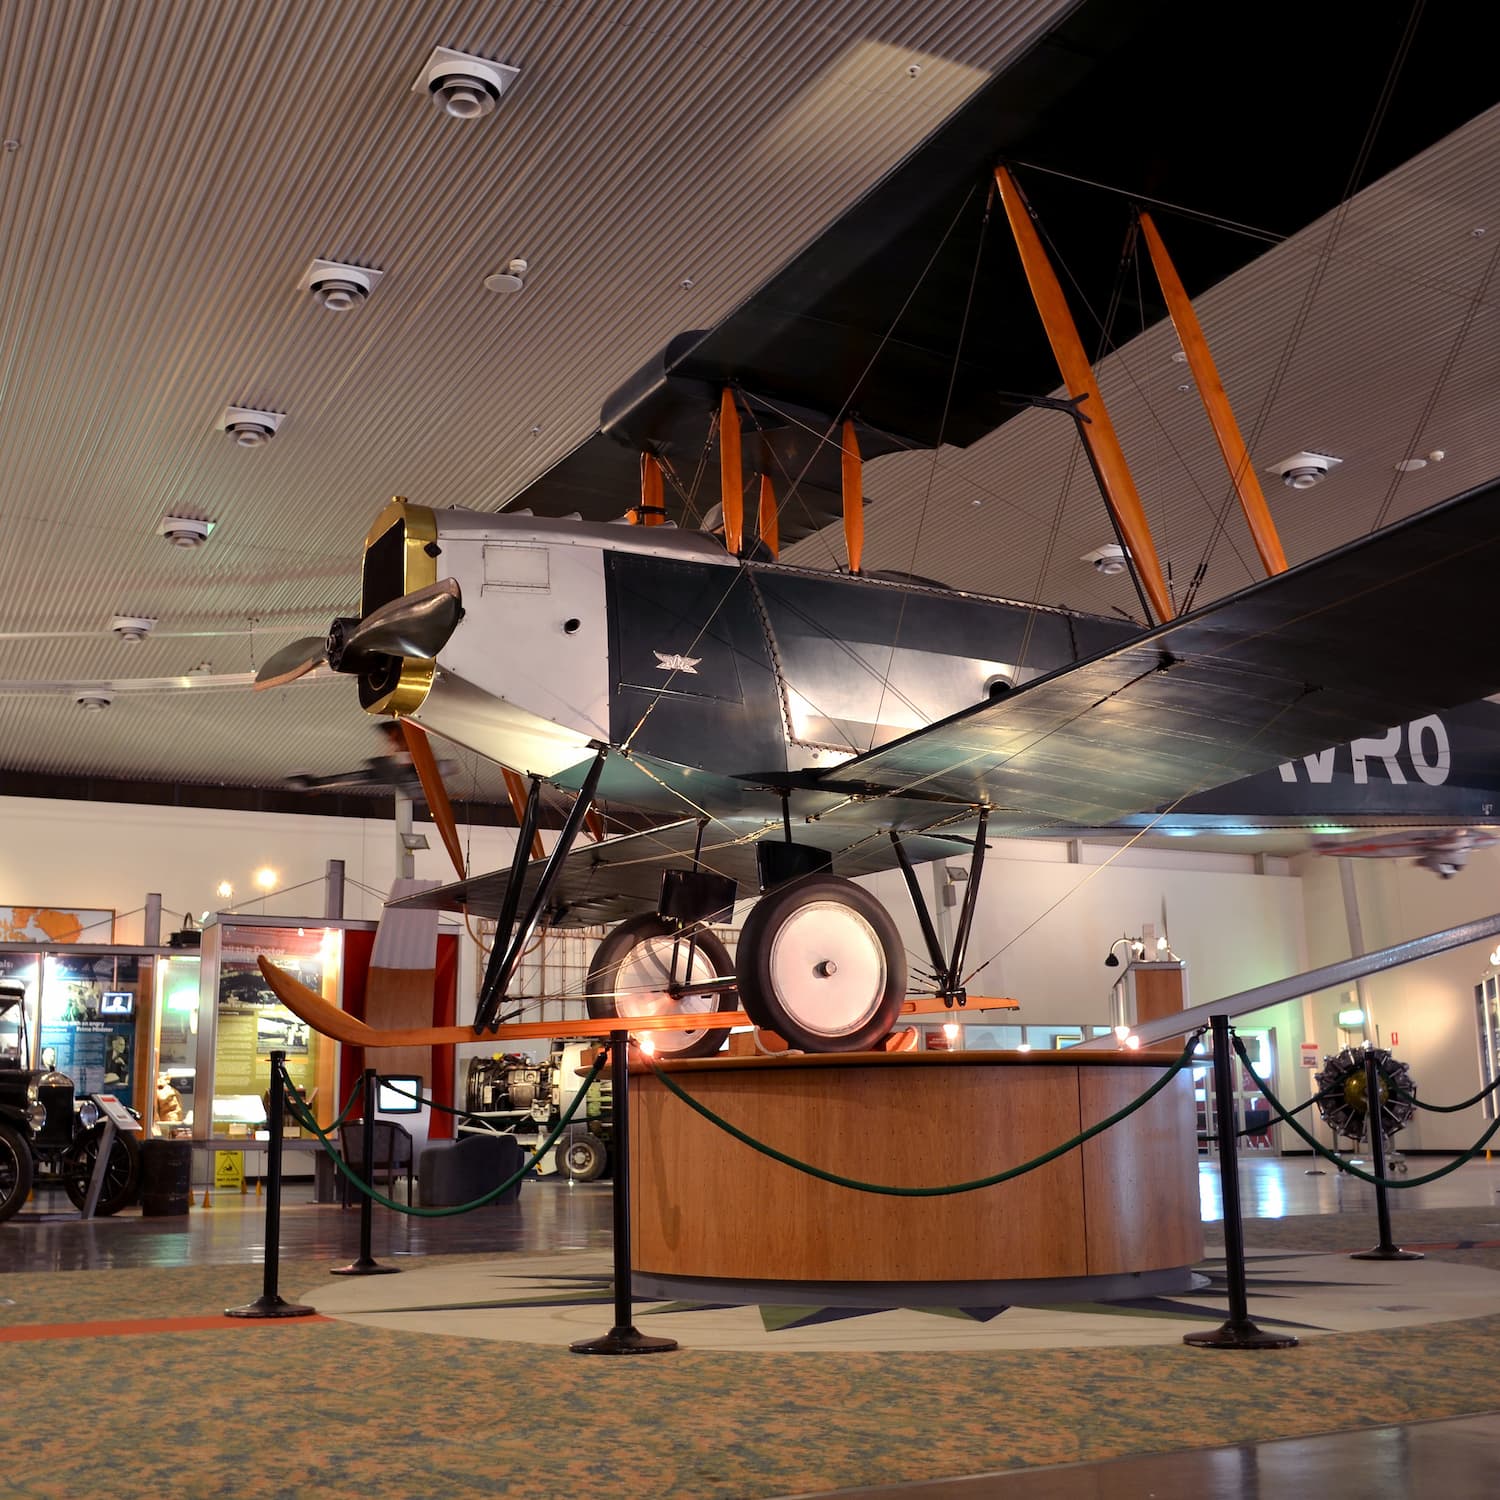 Full size model of the Avro plane displayed in the Qantas Founders Museum